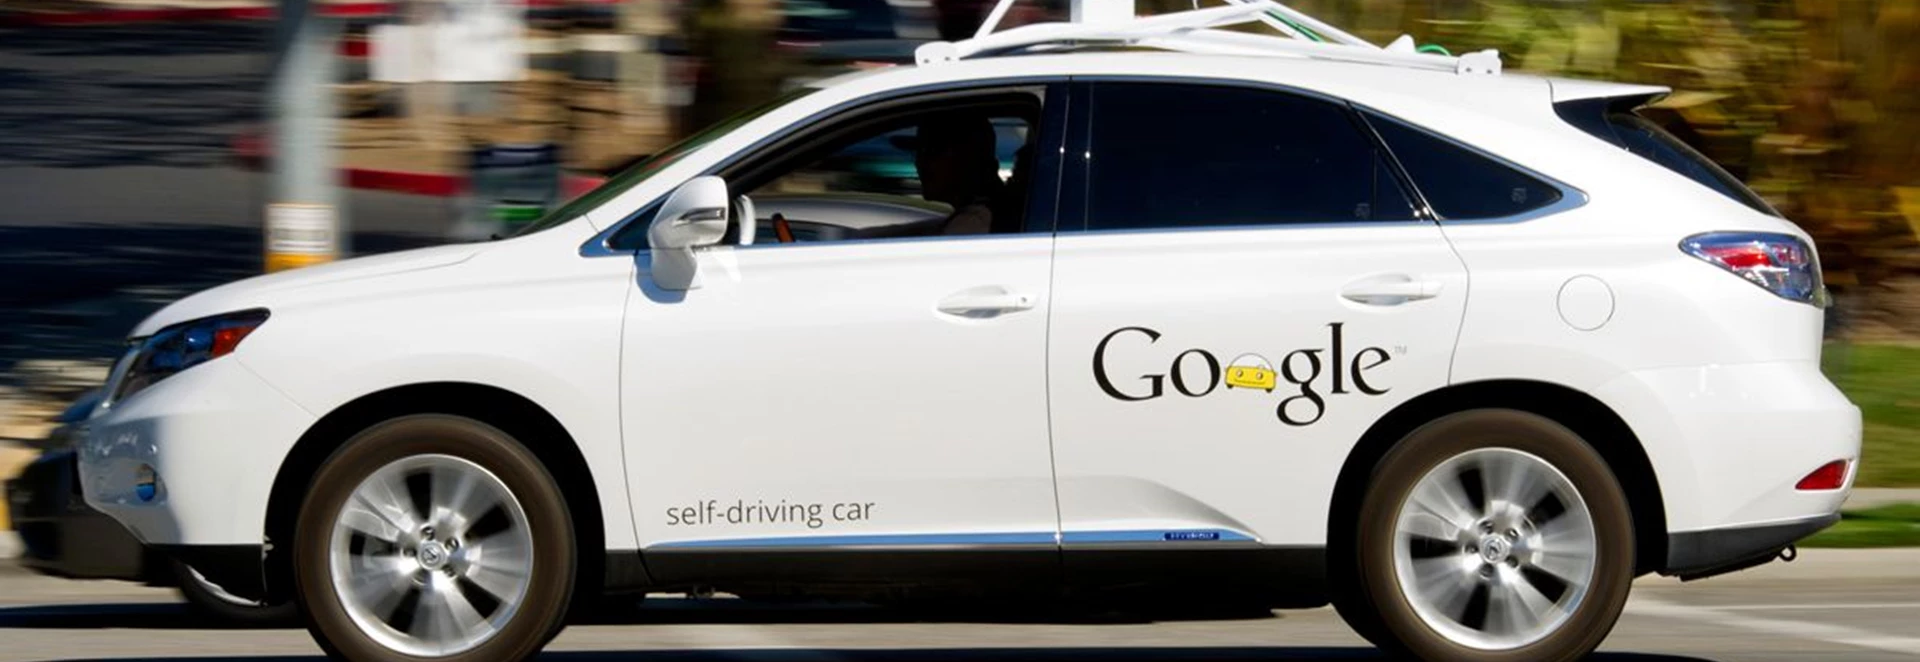 Google driverless car involved in heavy collision 